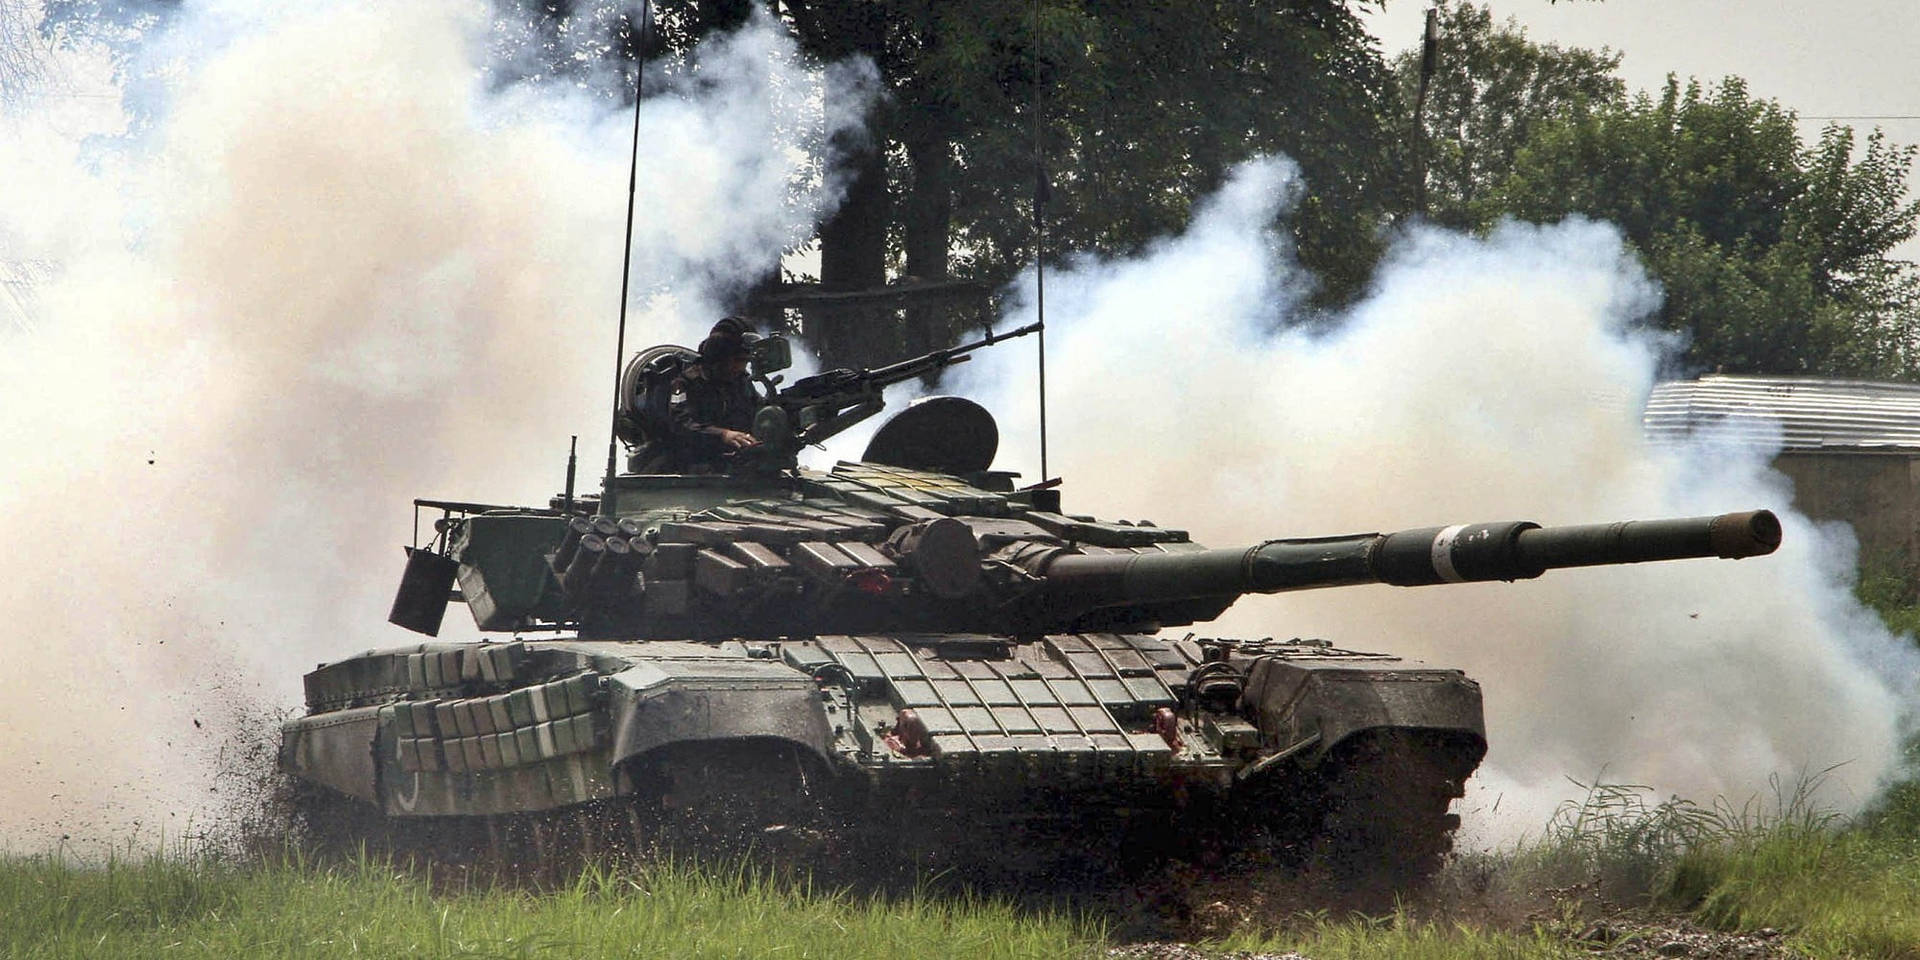 Indian Soldiers On Tank In Trials